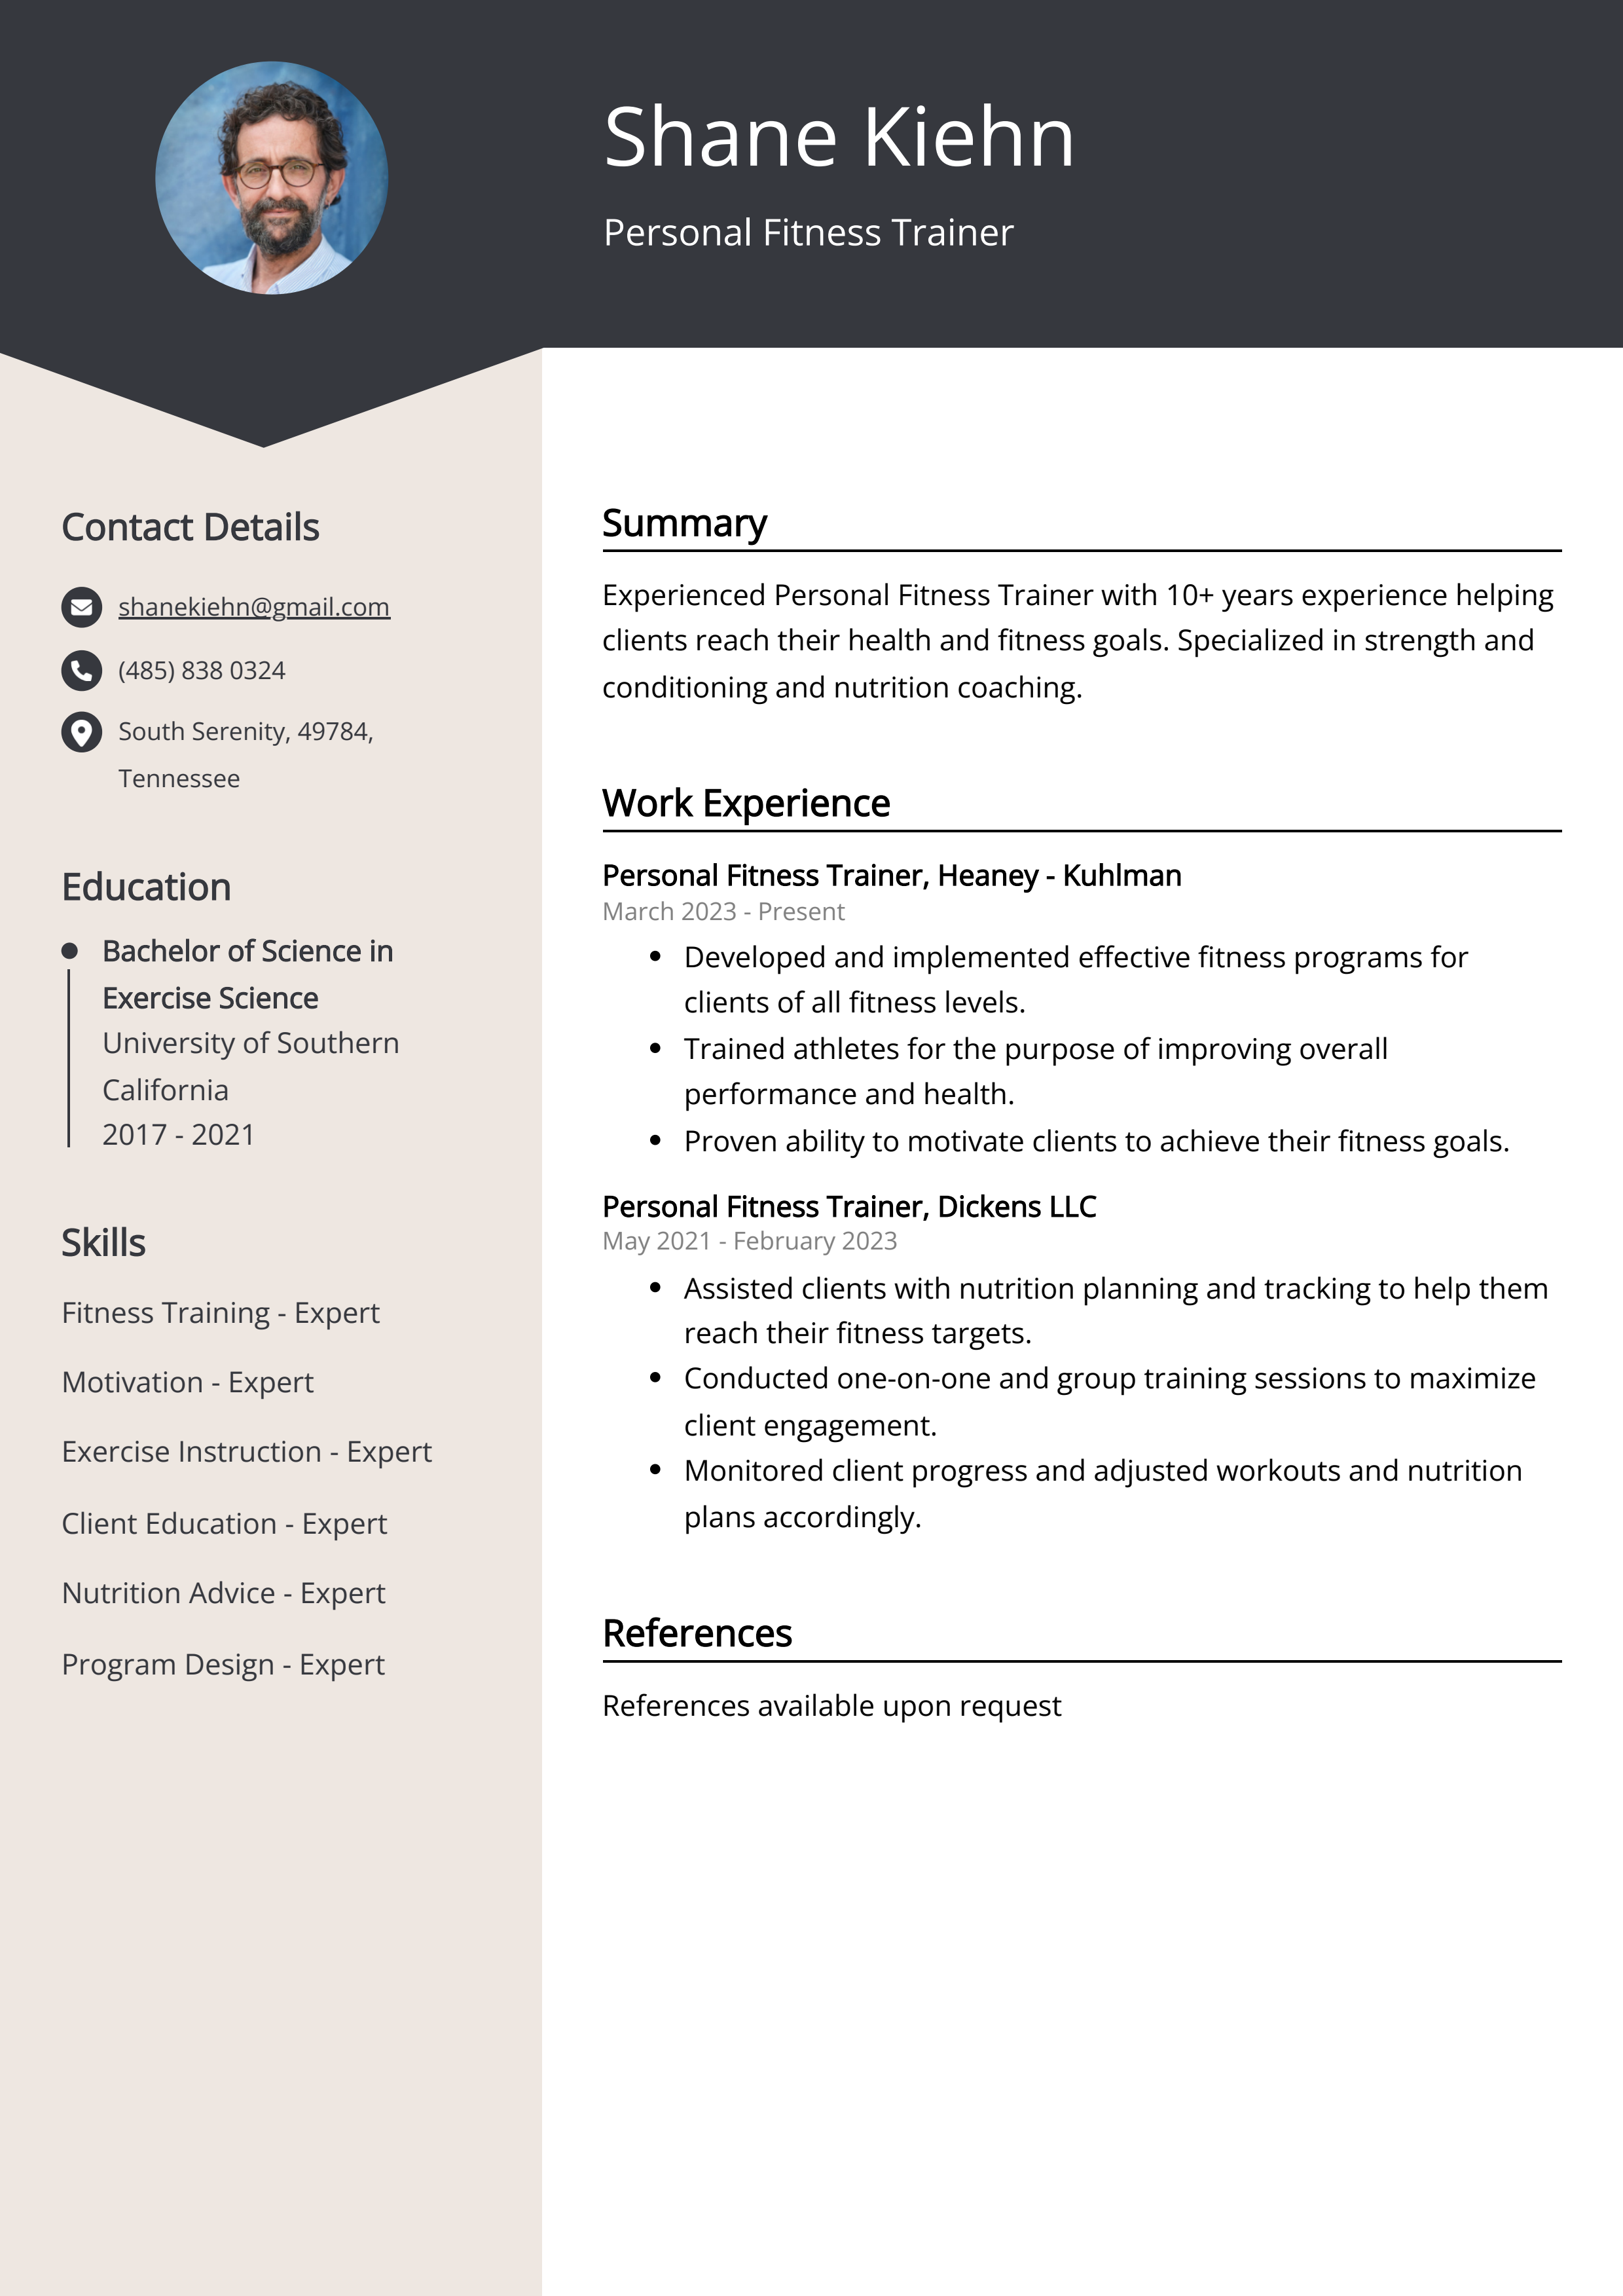 Personal Fitness Trainer Resume Example